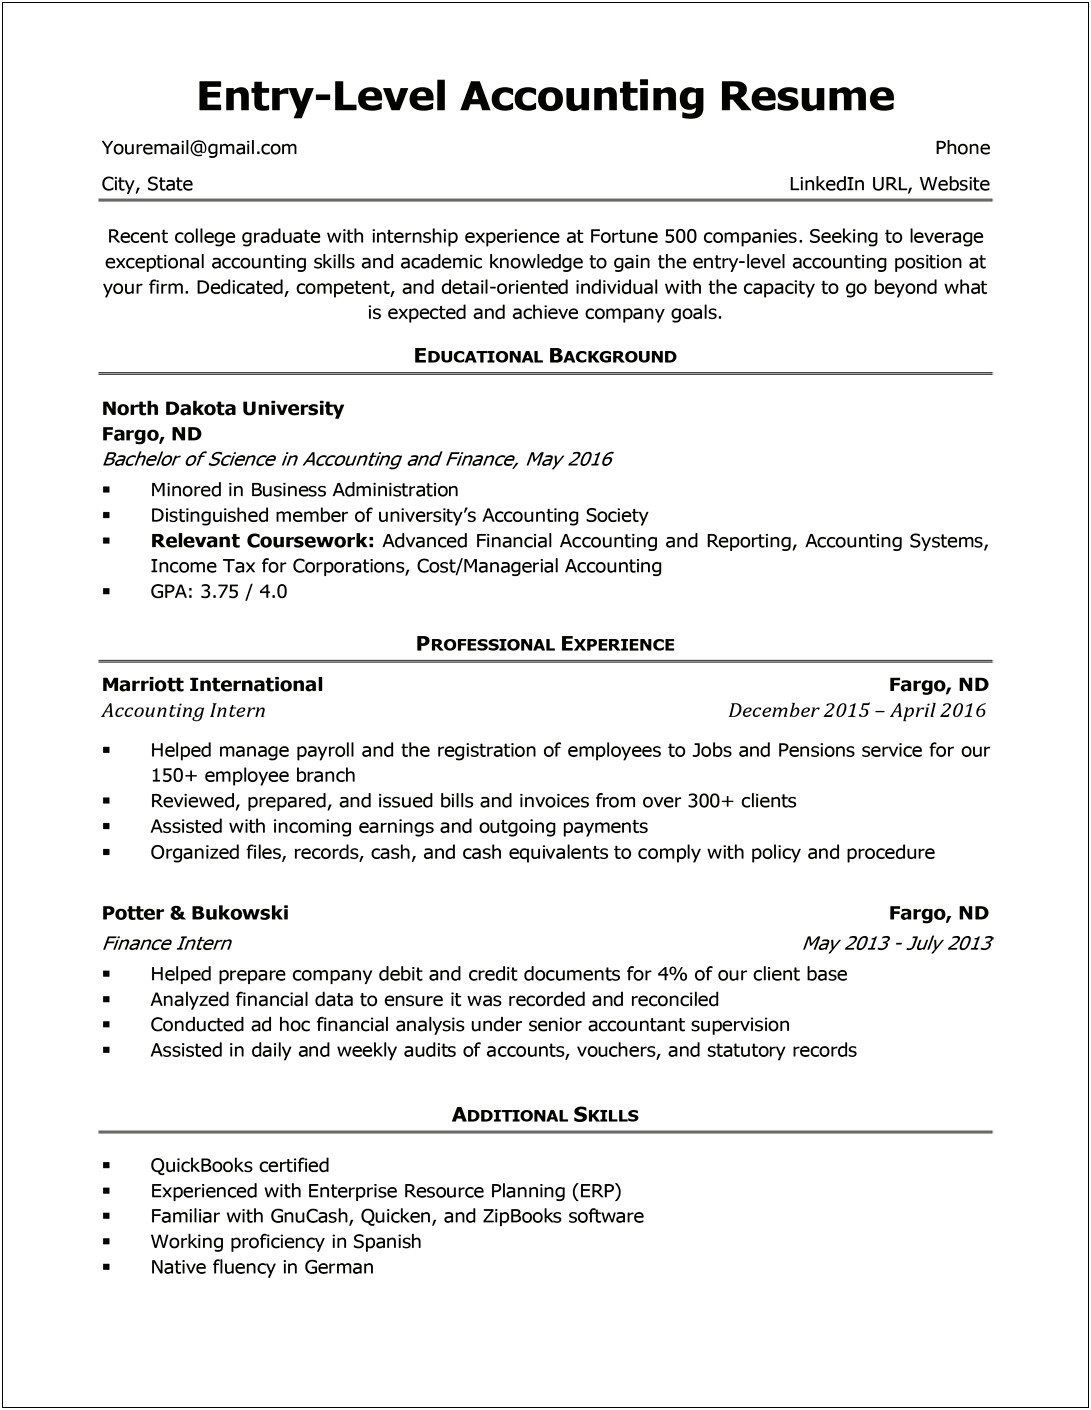 Describe Experiences With Using Quickbooks On Resume